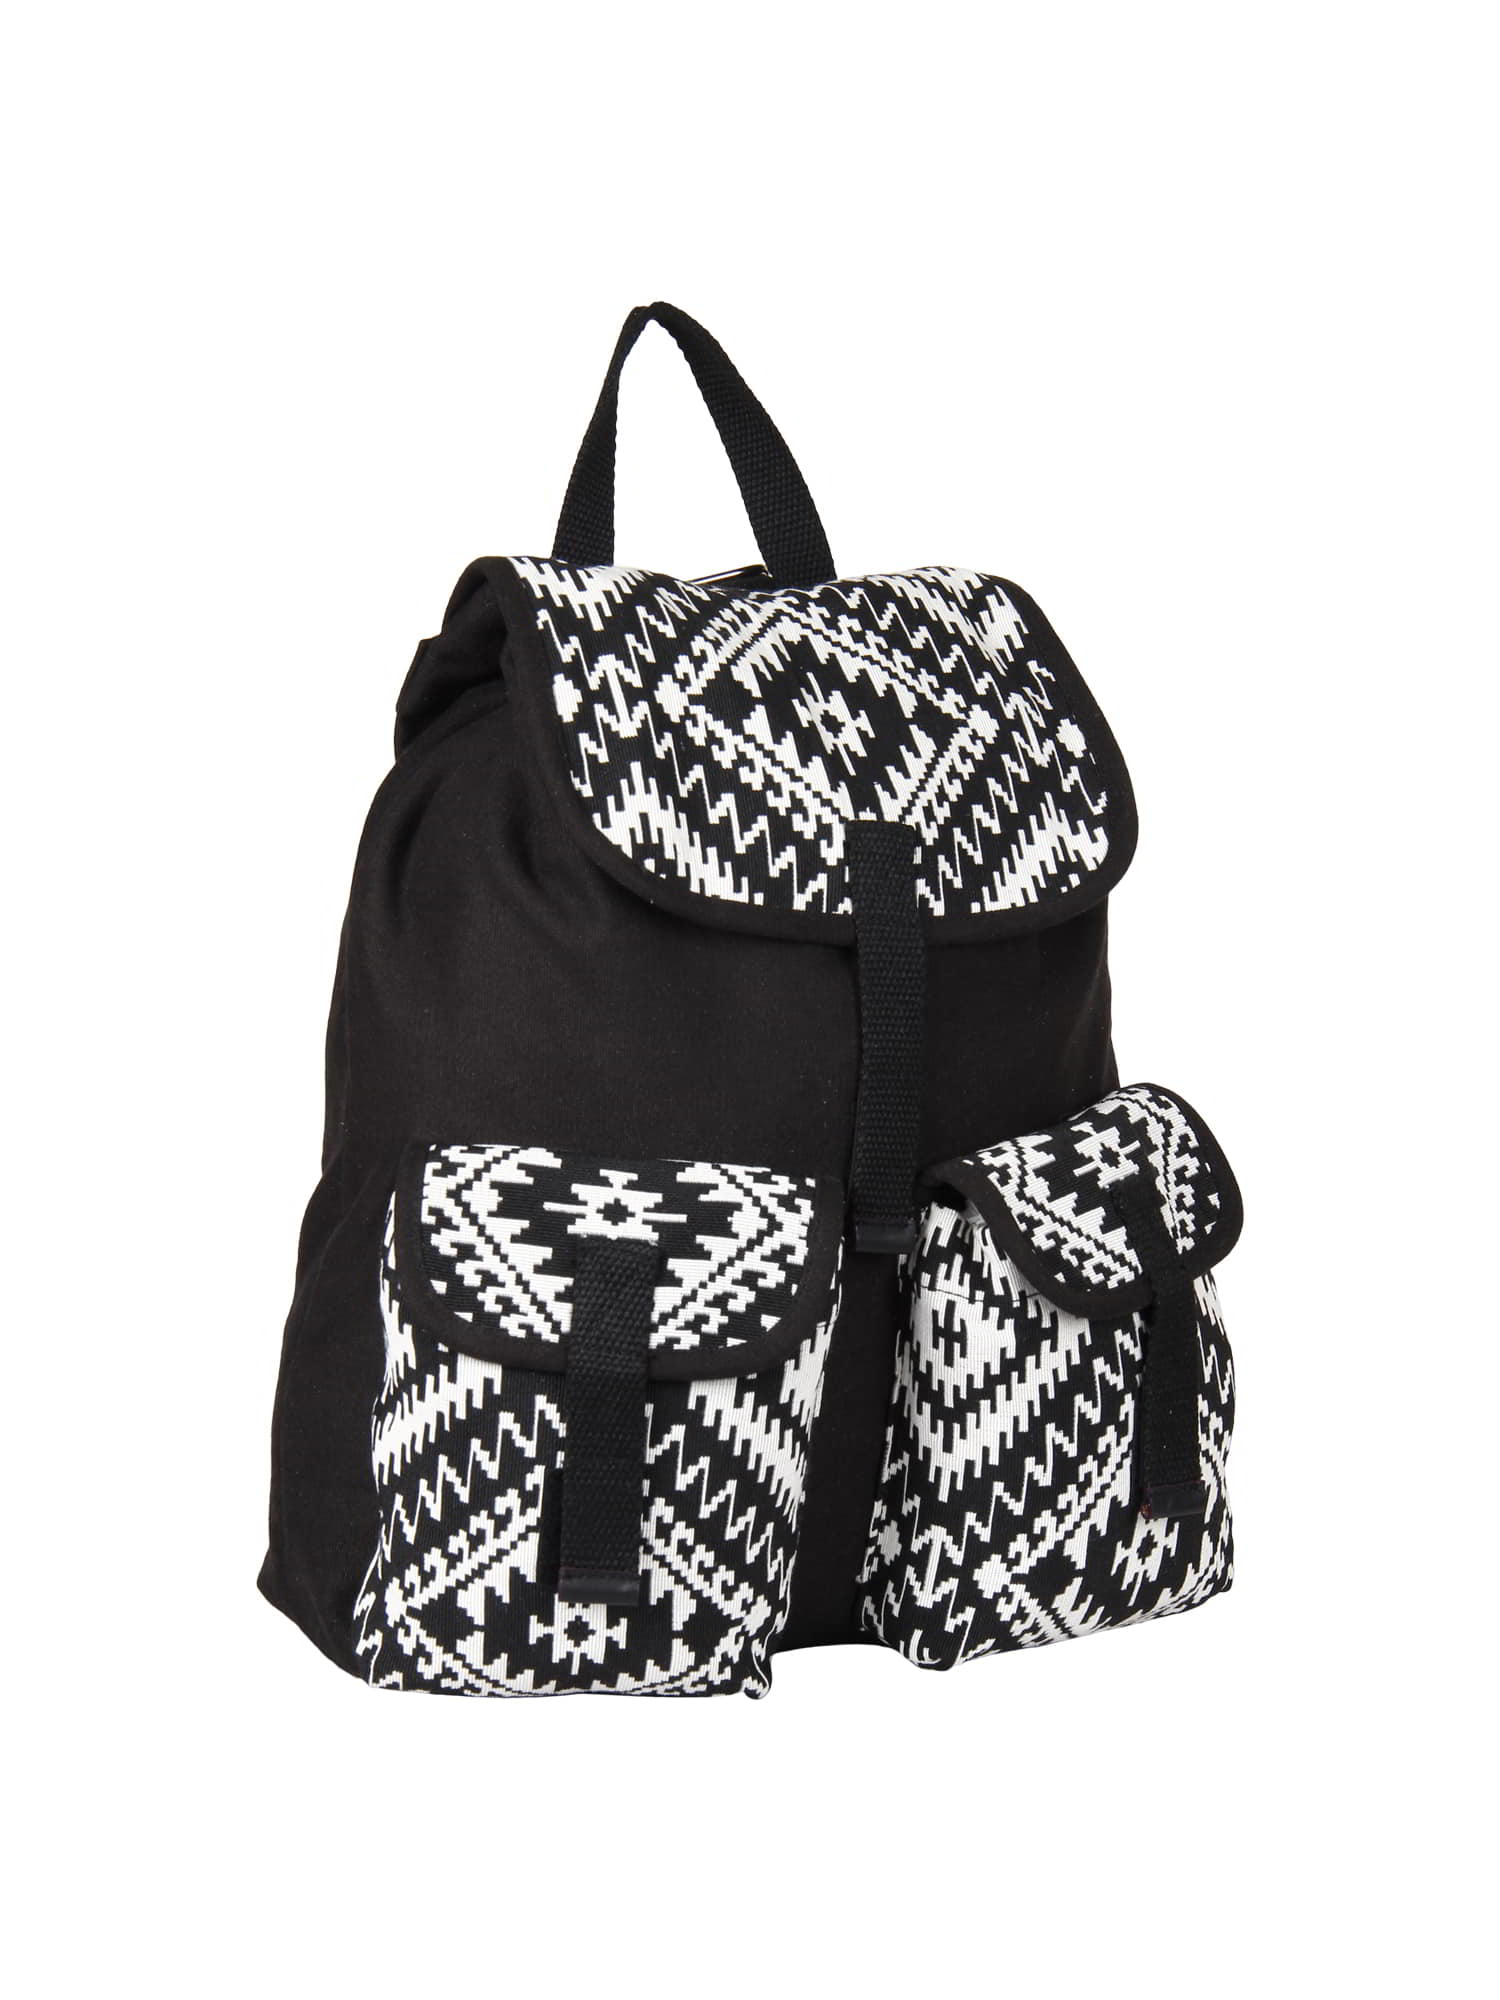 Monochrome Canvas Printed Backpack